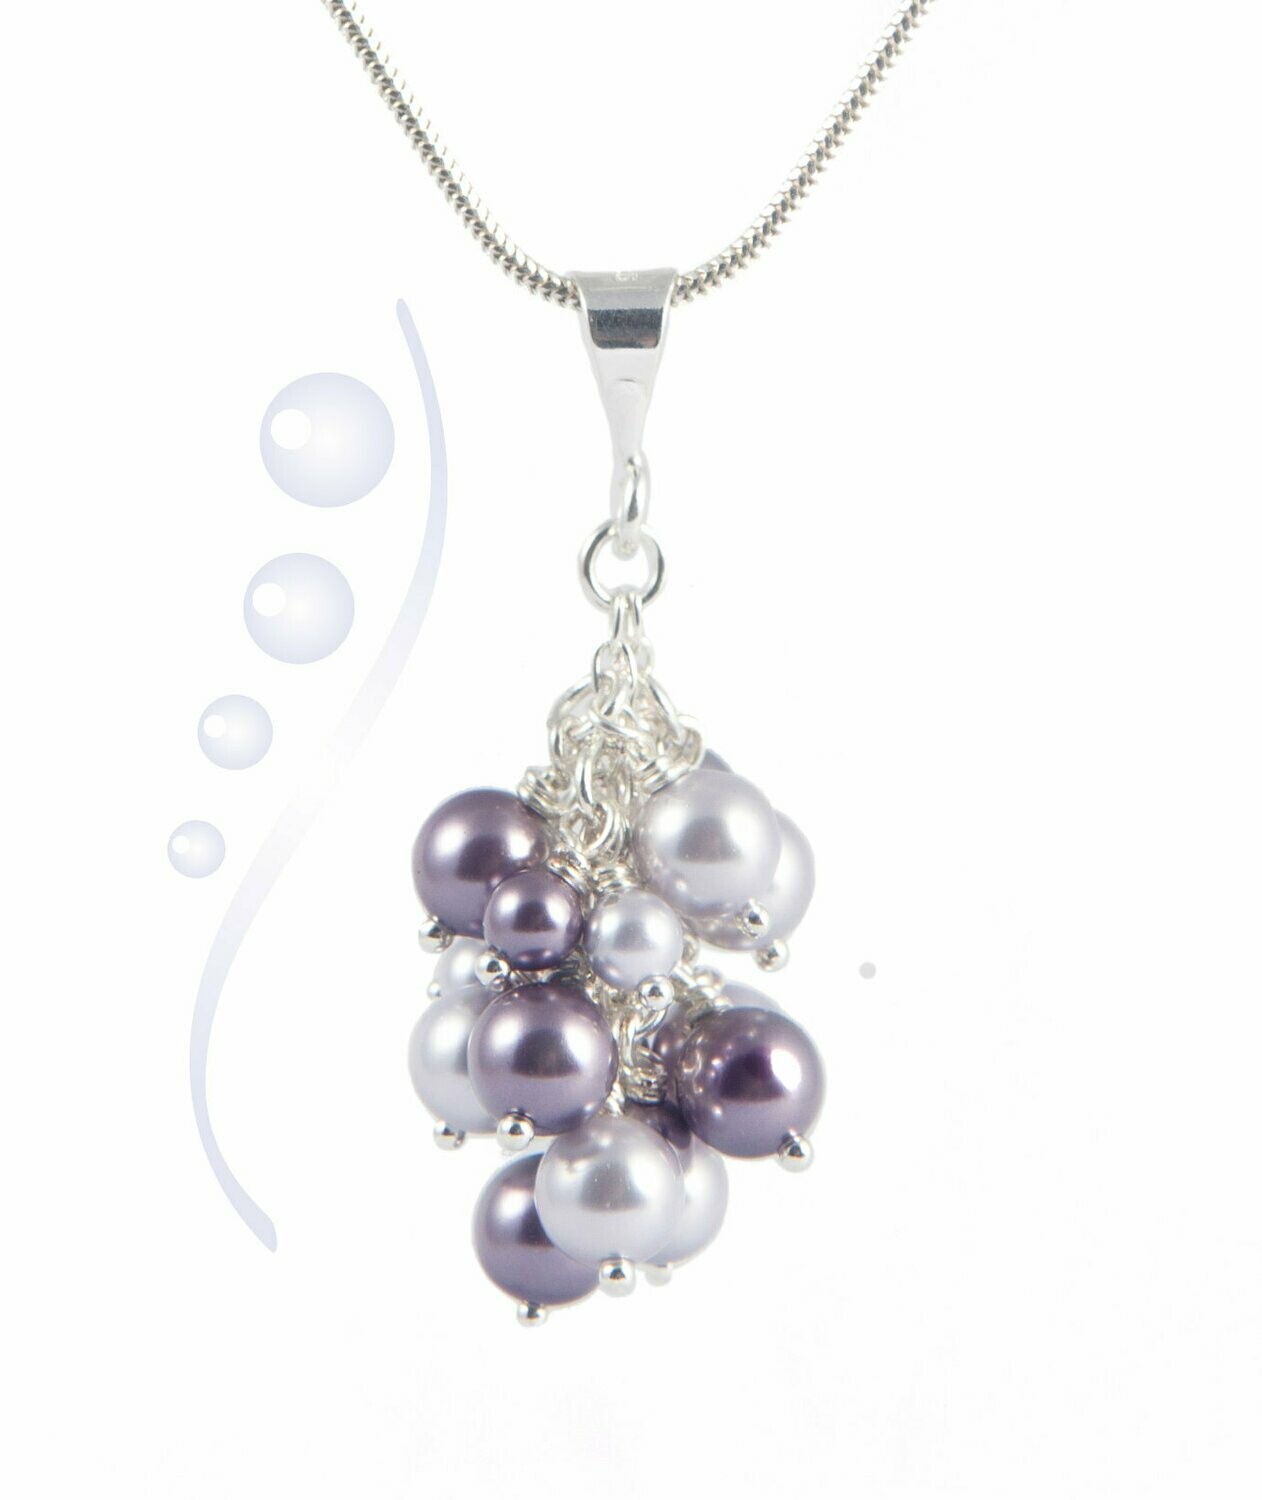 Lilac Pearl Pendant Necklace with Swarovski Crystal Pearls